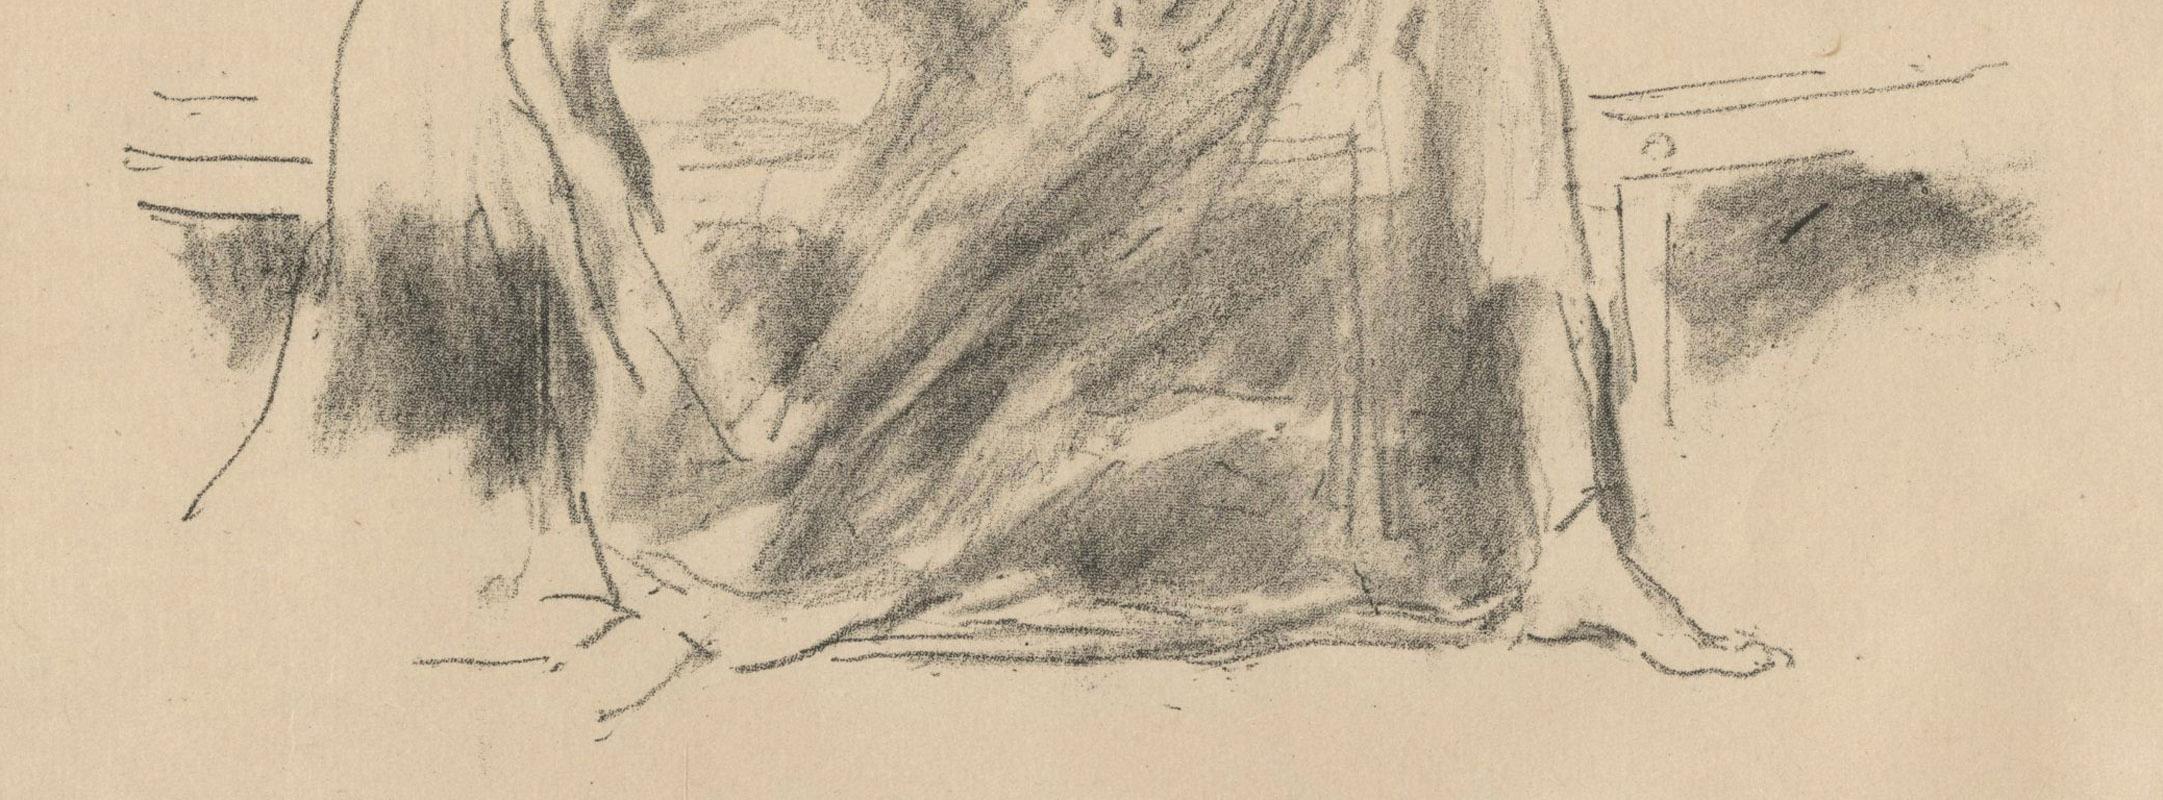 The Draped Figure, Seated
Lithograph on fine japanese paper, 1893
Signed in pencil with the butterfly (see photo)
Signed in the stone with the butterfly on the sofa (see photo)
Numbered: 